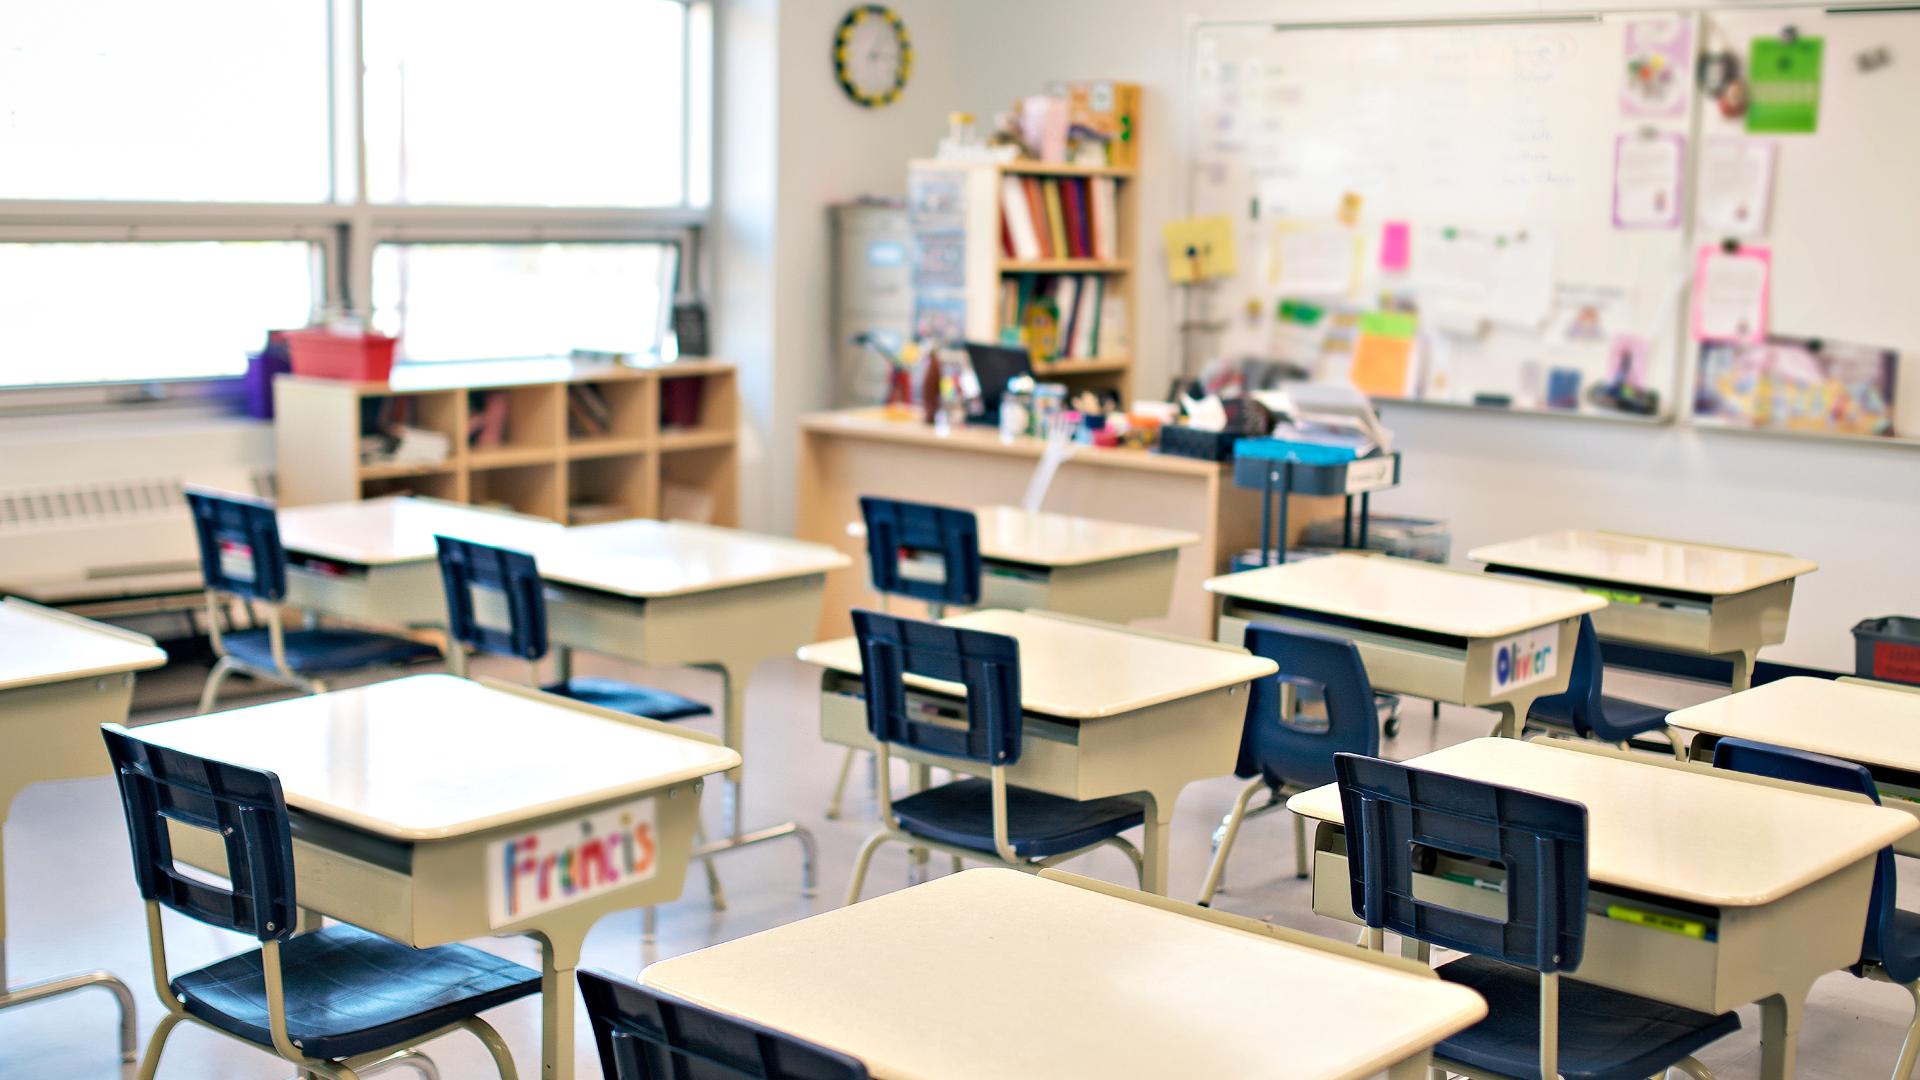 On Wednesday, the Iowa State Board of Education released a set of newly-proposed rules for SF 496 enforcement in schools. Here's what that means for your kids.